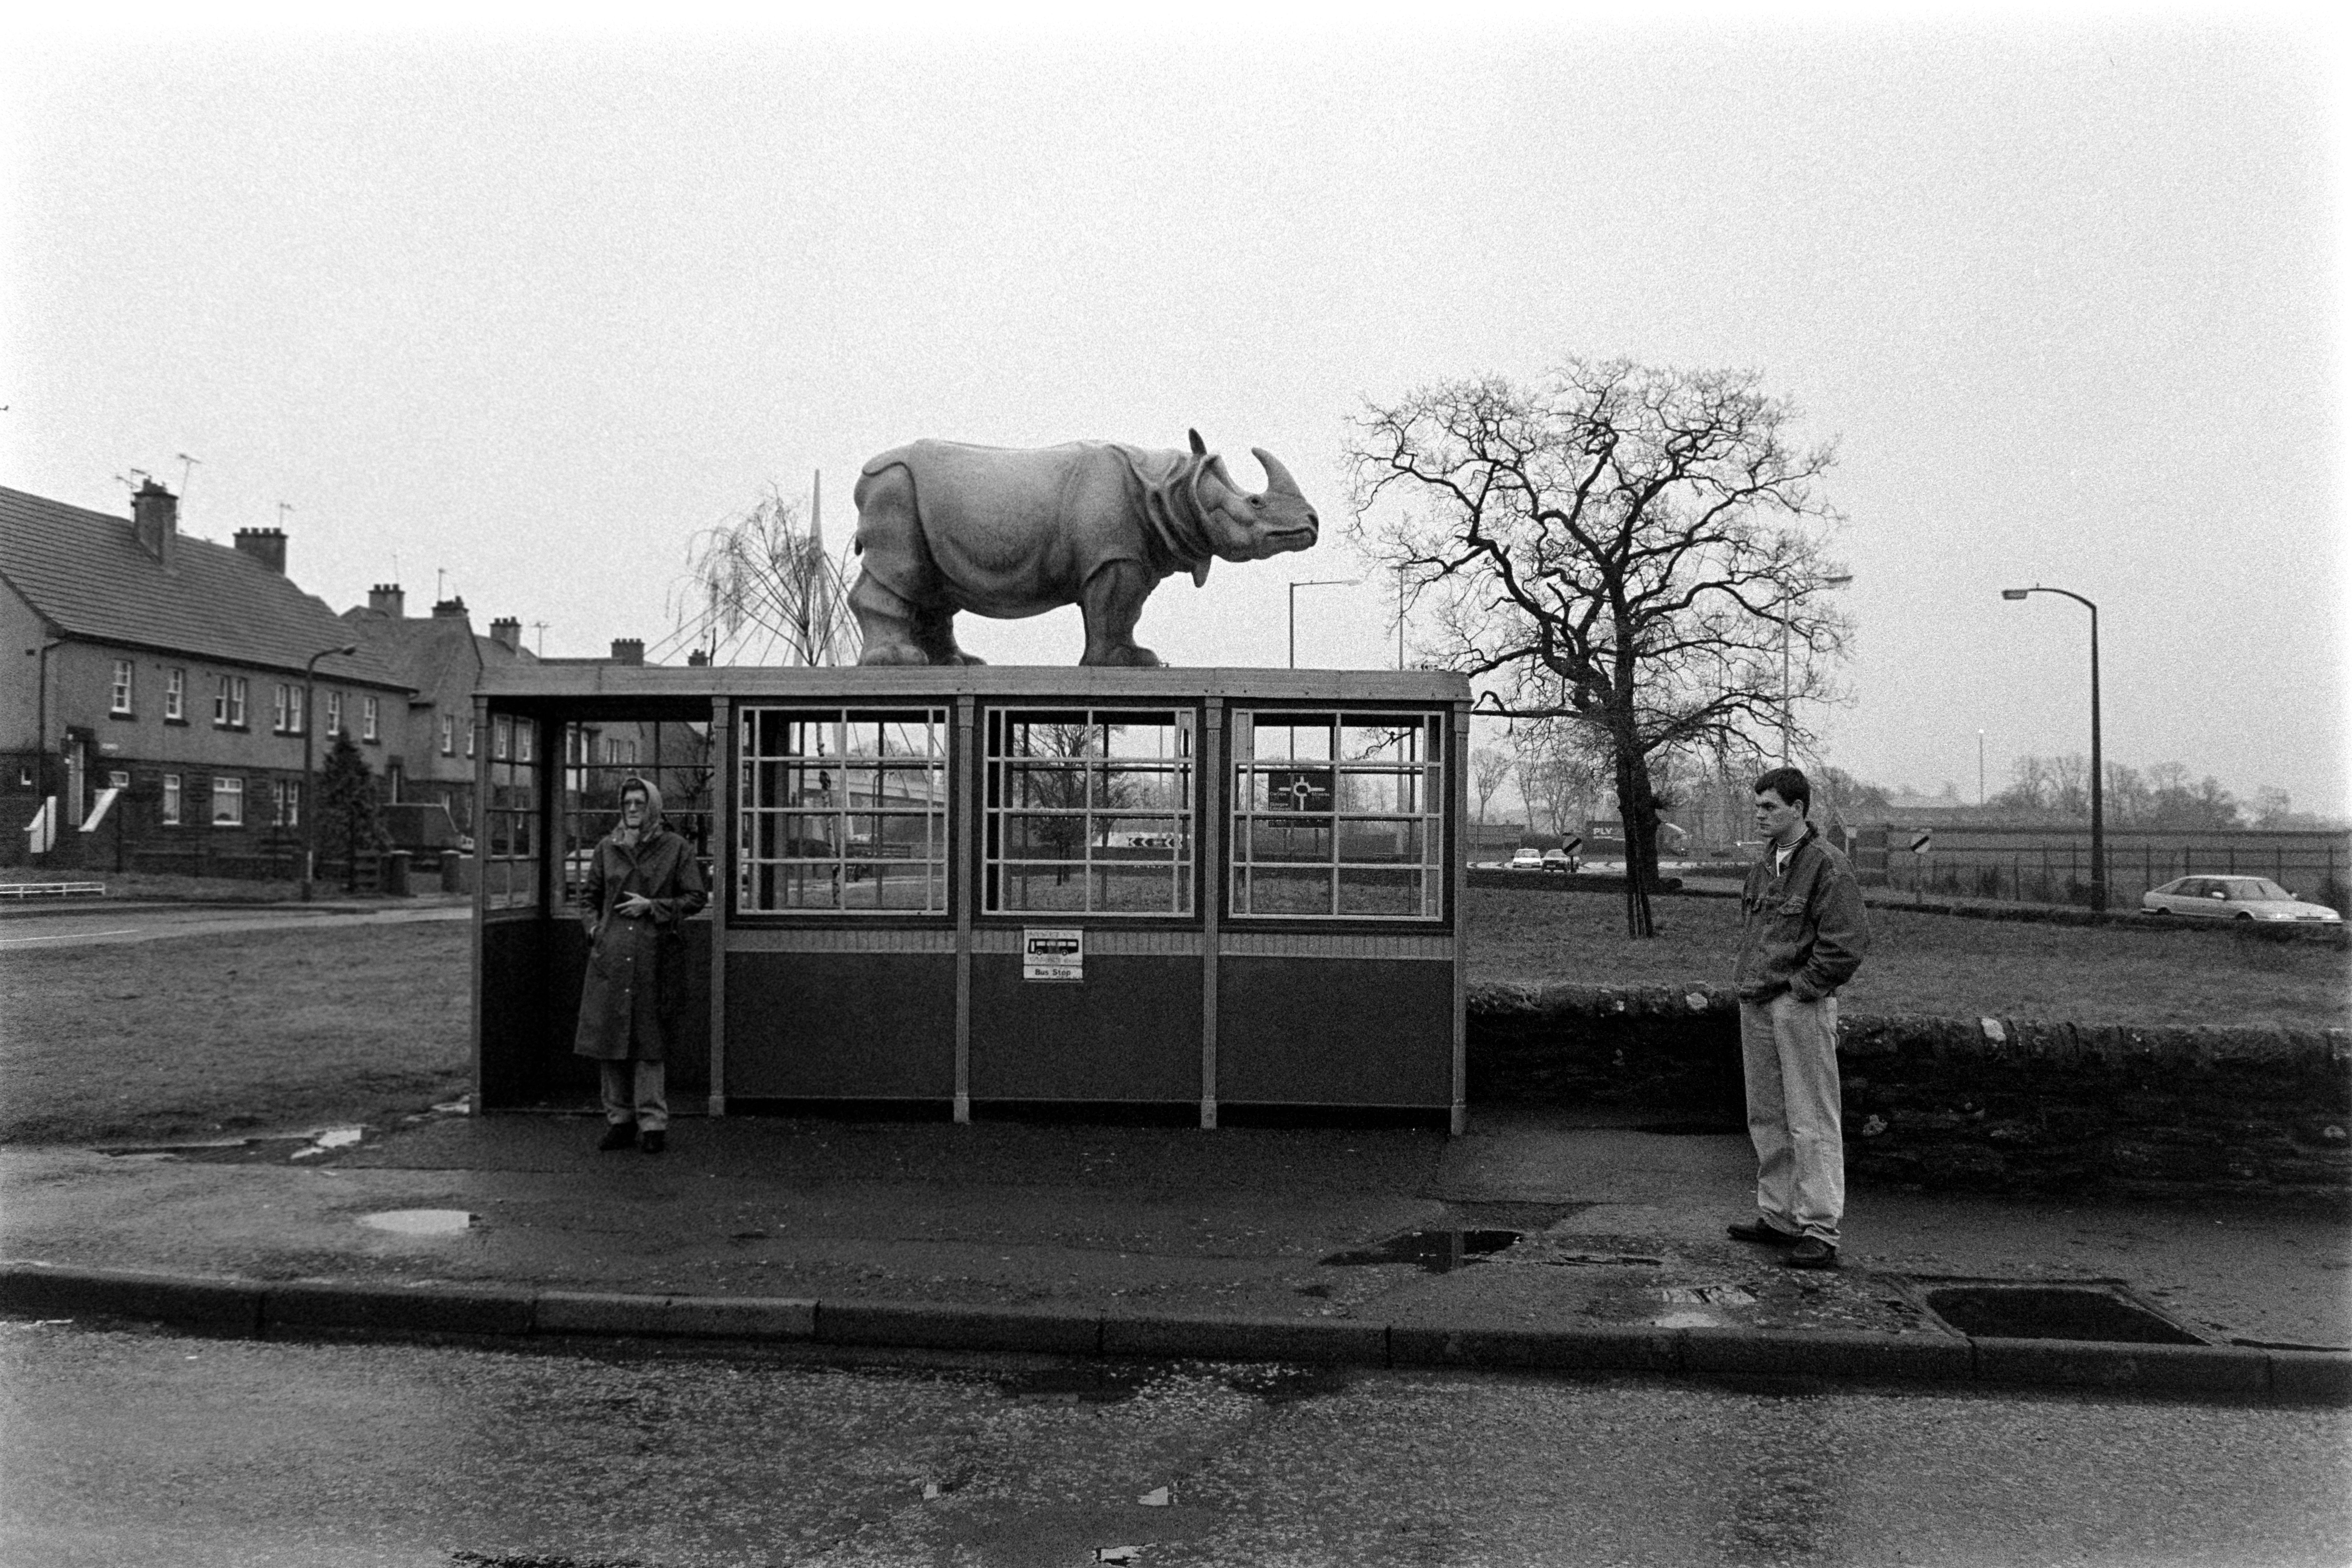 A rhinoceros on top of a bus stop.